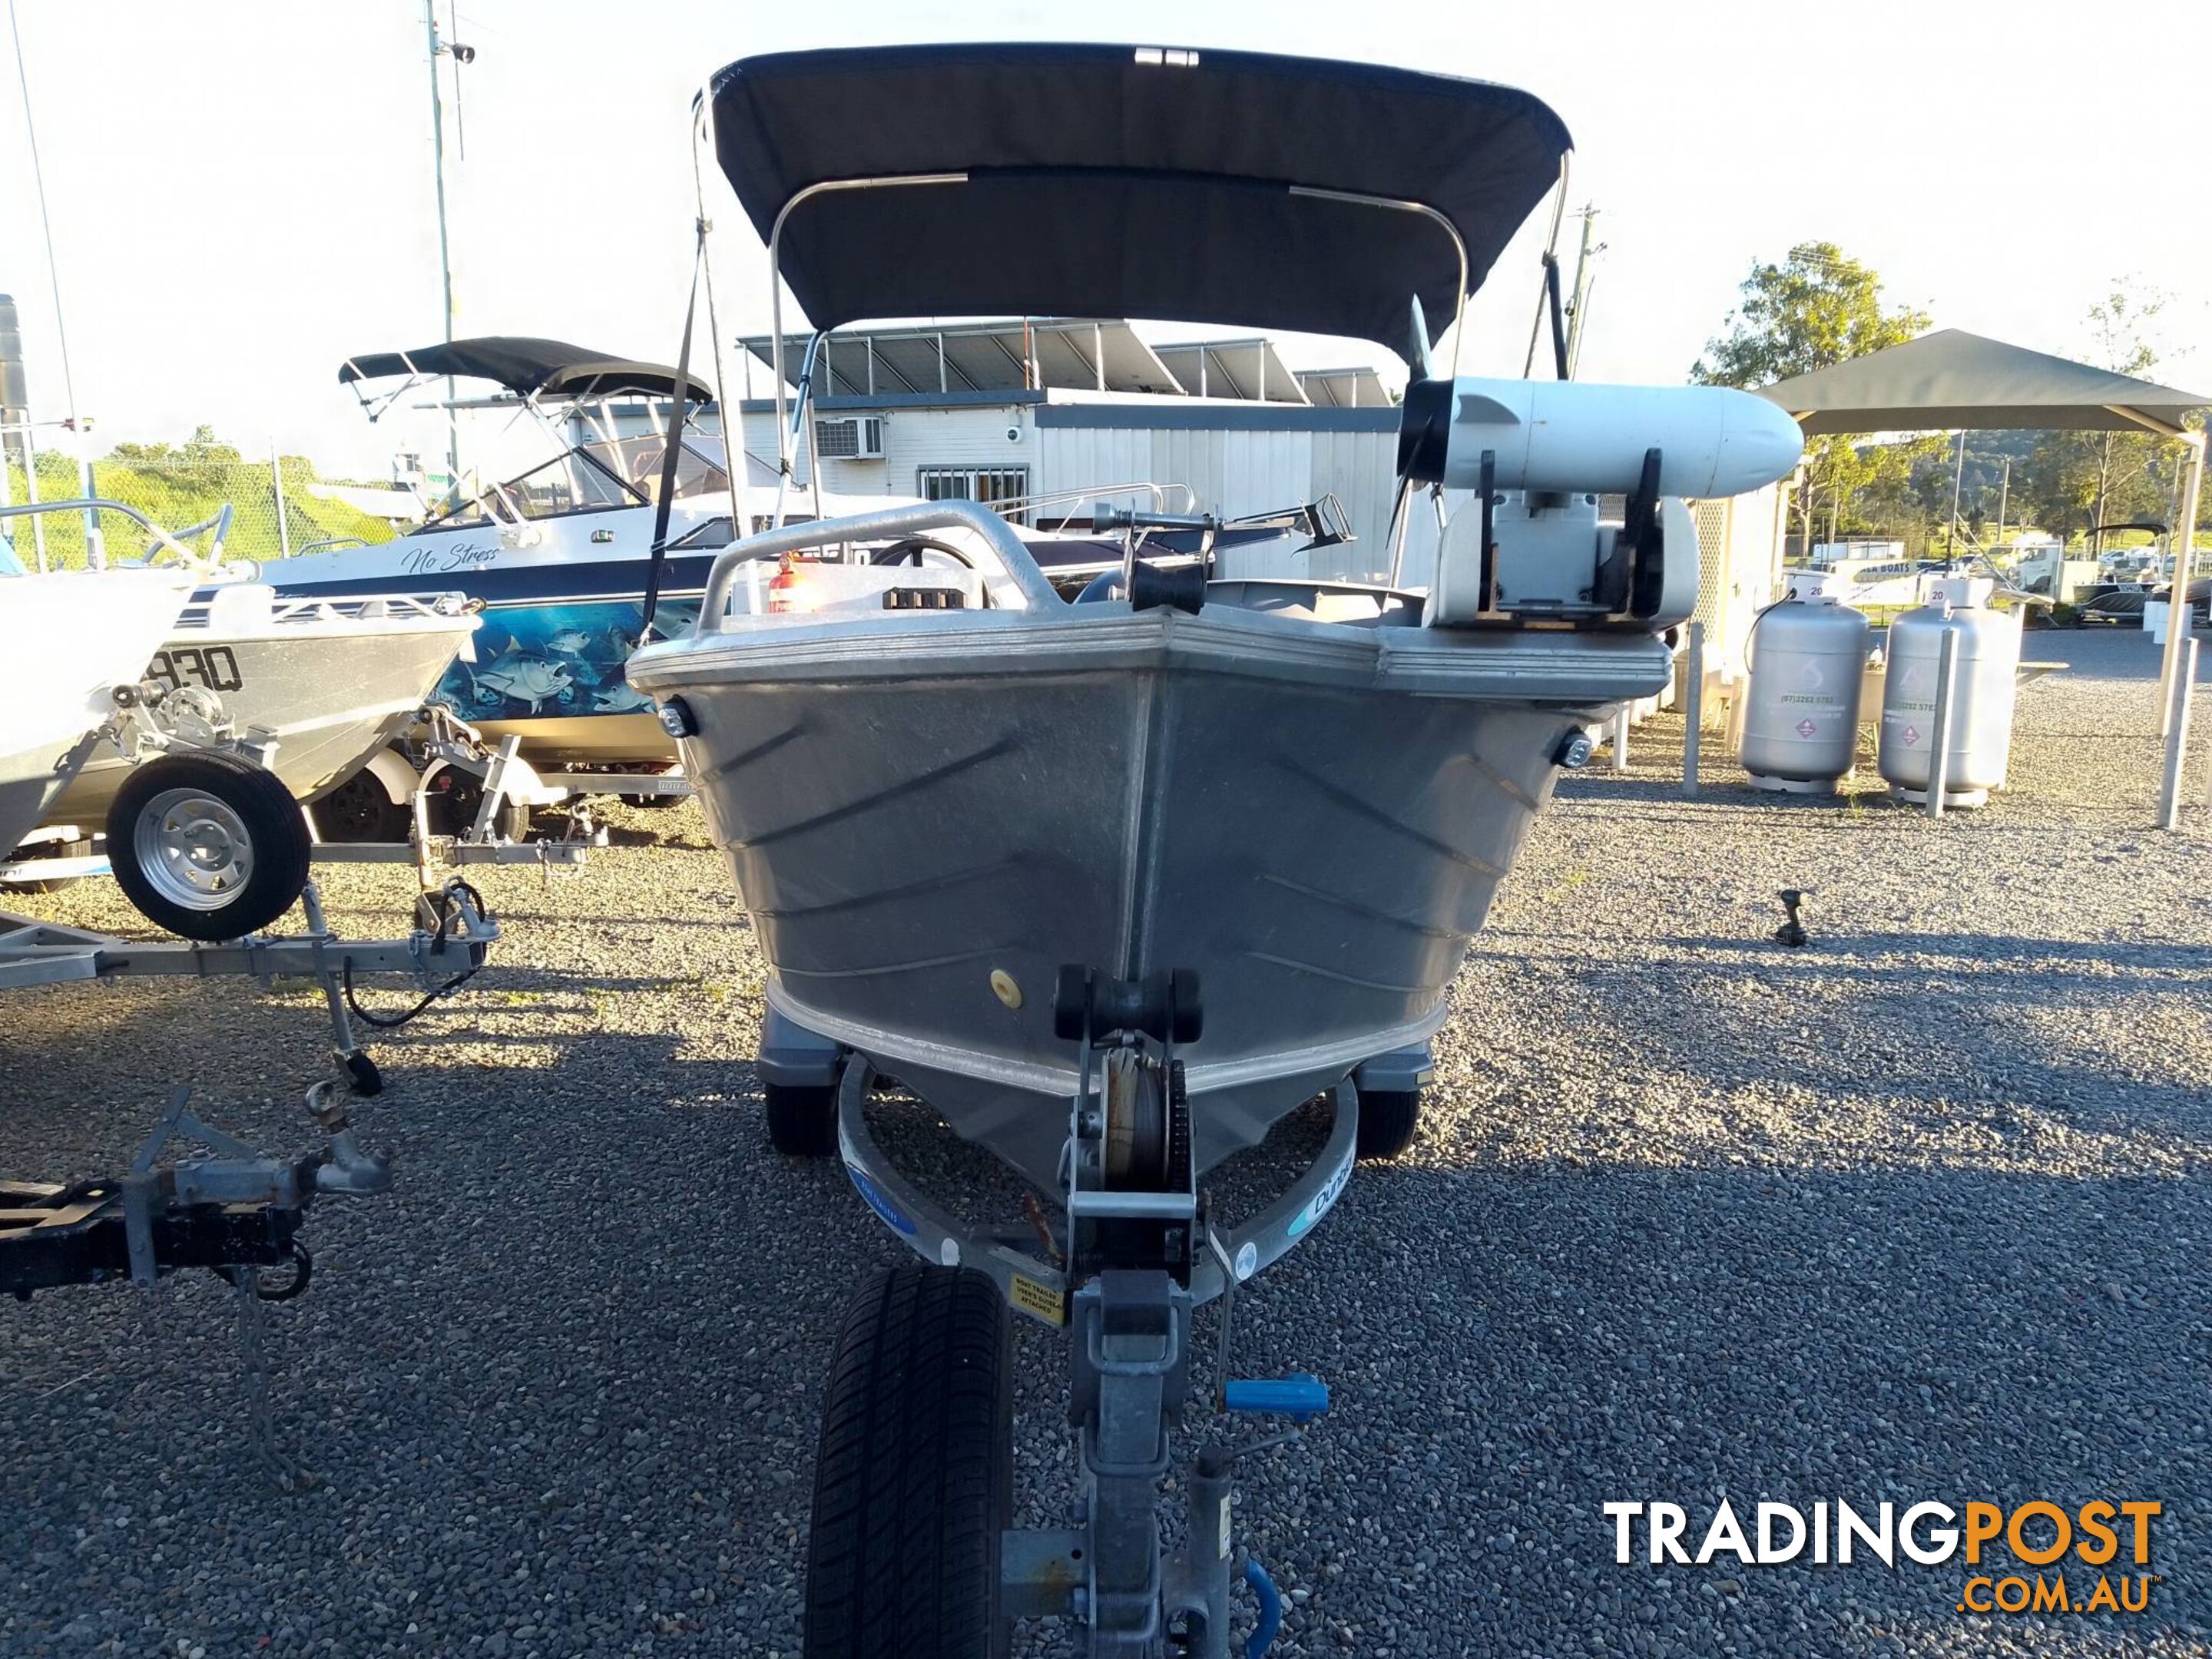 HORIZON 420 ALL-ROUNDER SIDE COSOLE 40HP YAMAHA 4 STROKE AND TRAILER